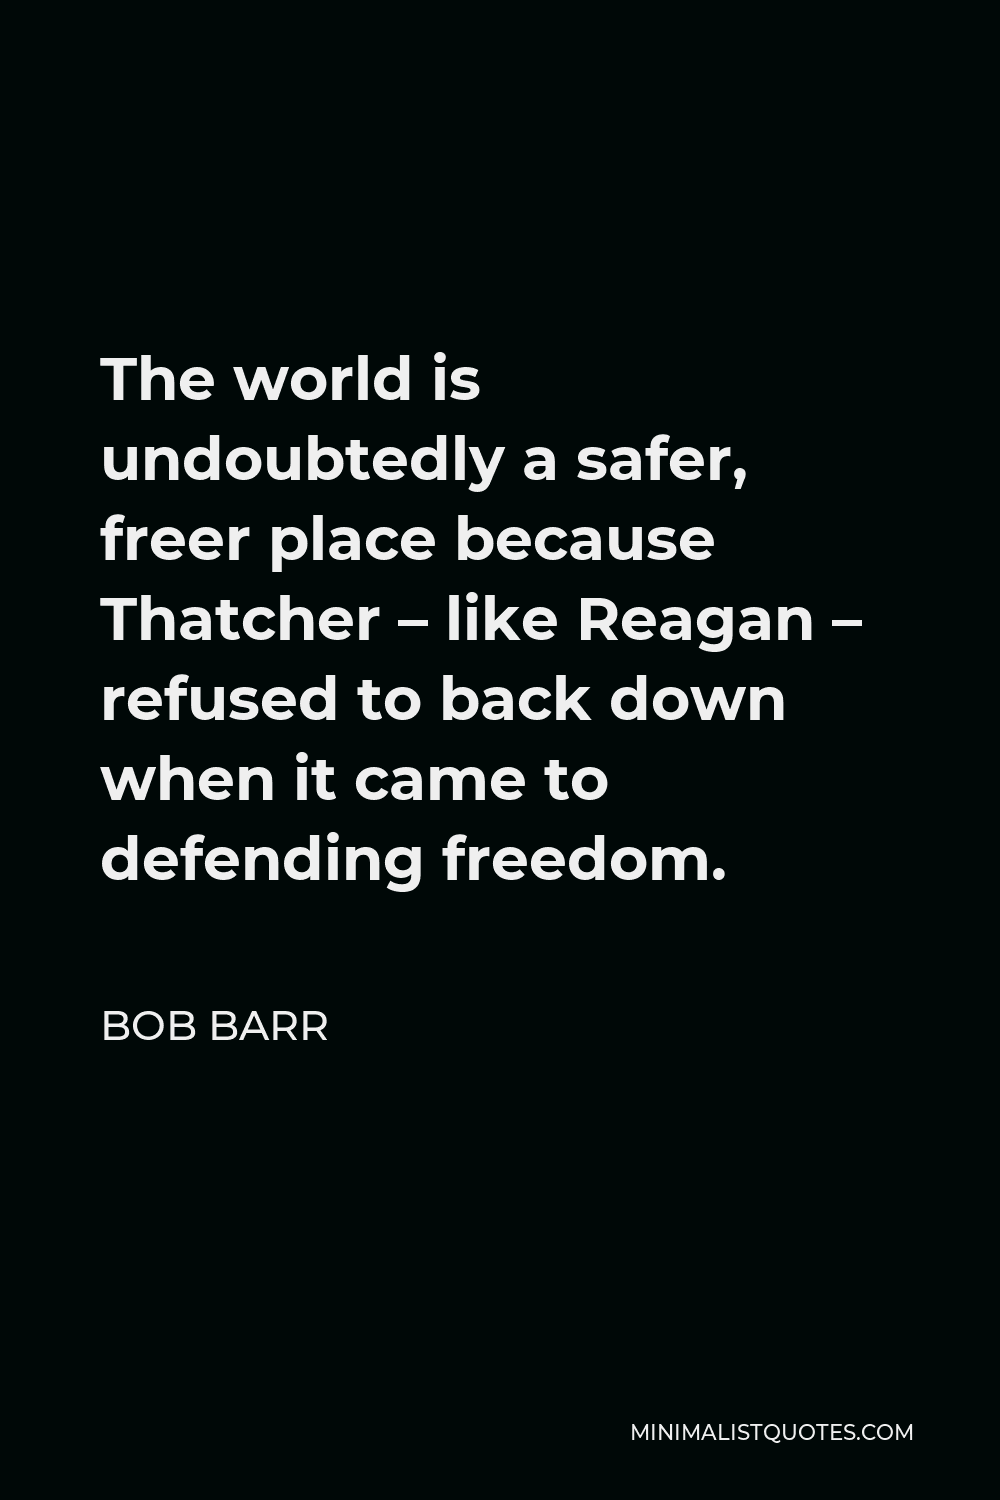 Bob Barr Quote - The world is undoubtedly a safer, freer place because Thatcher – like Reagan – refused to back down when it came to defending freedom.